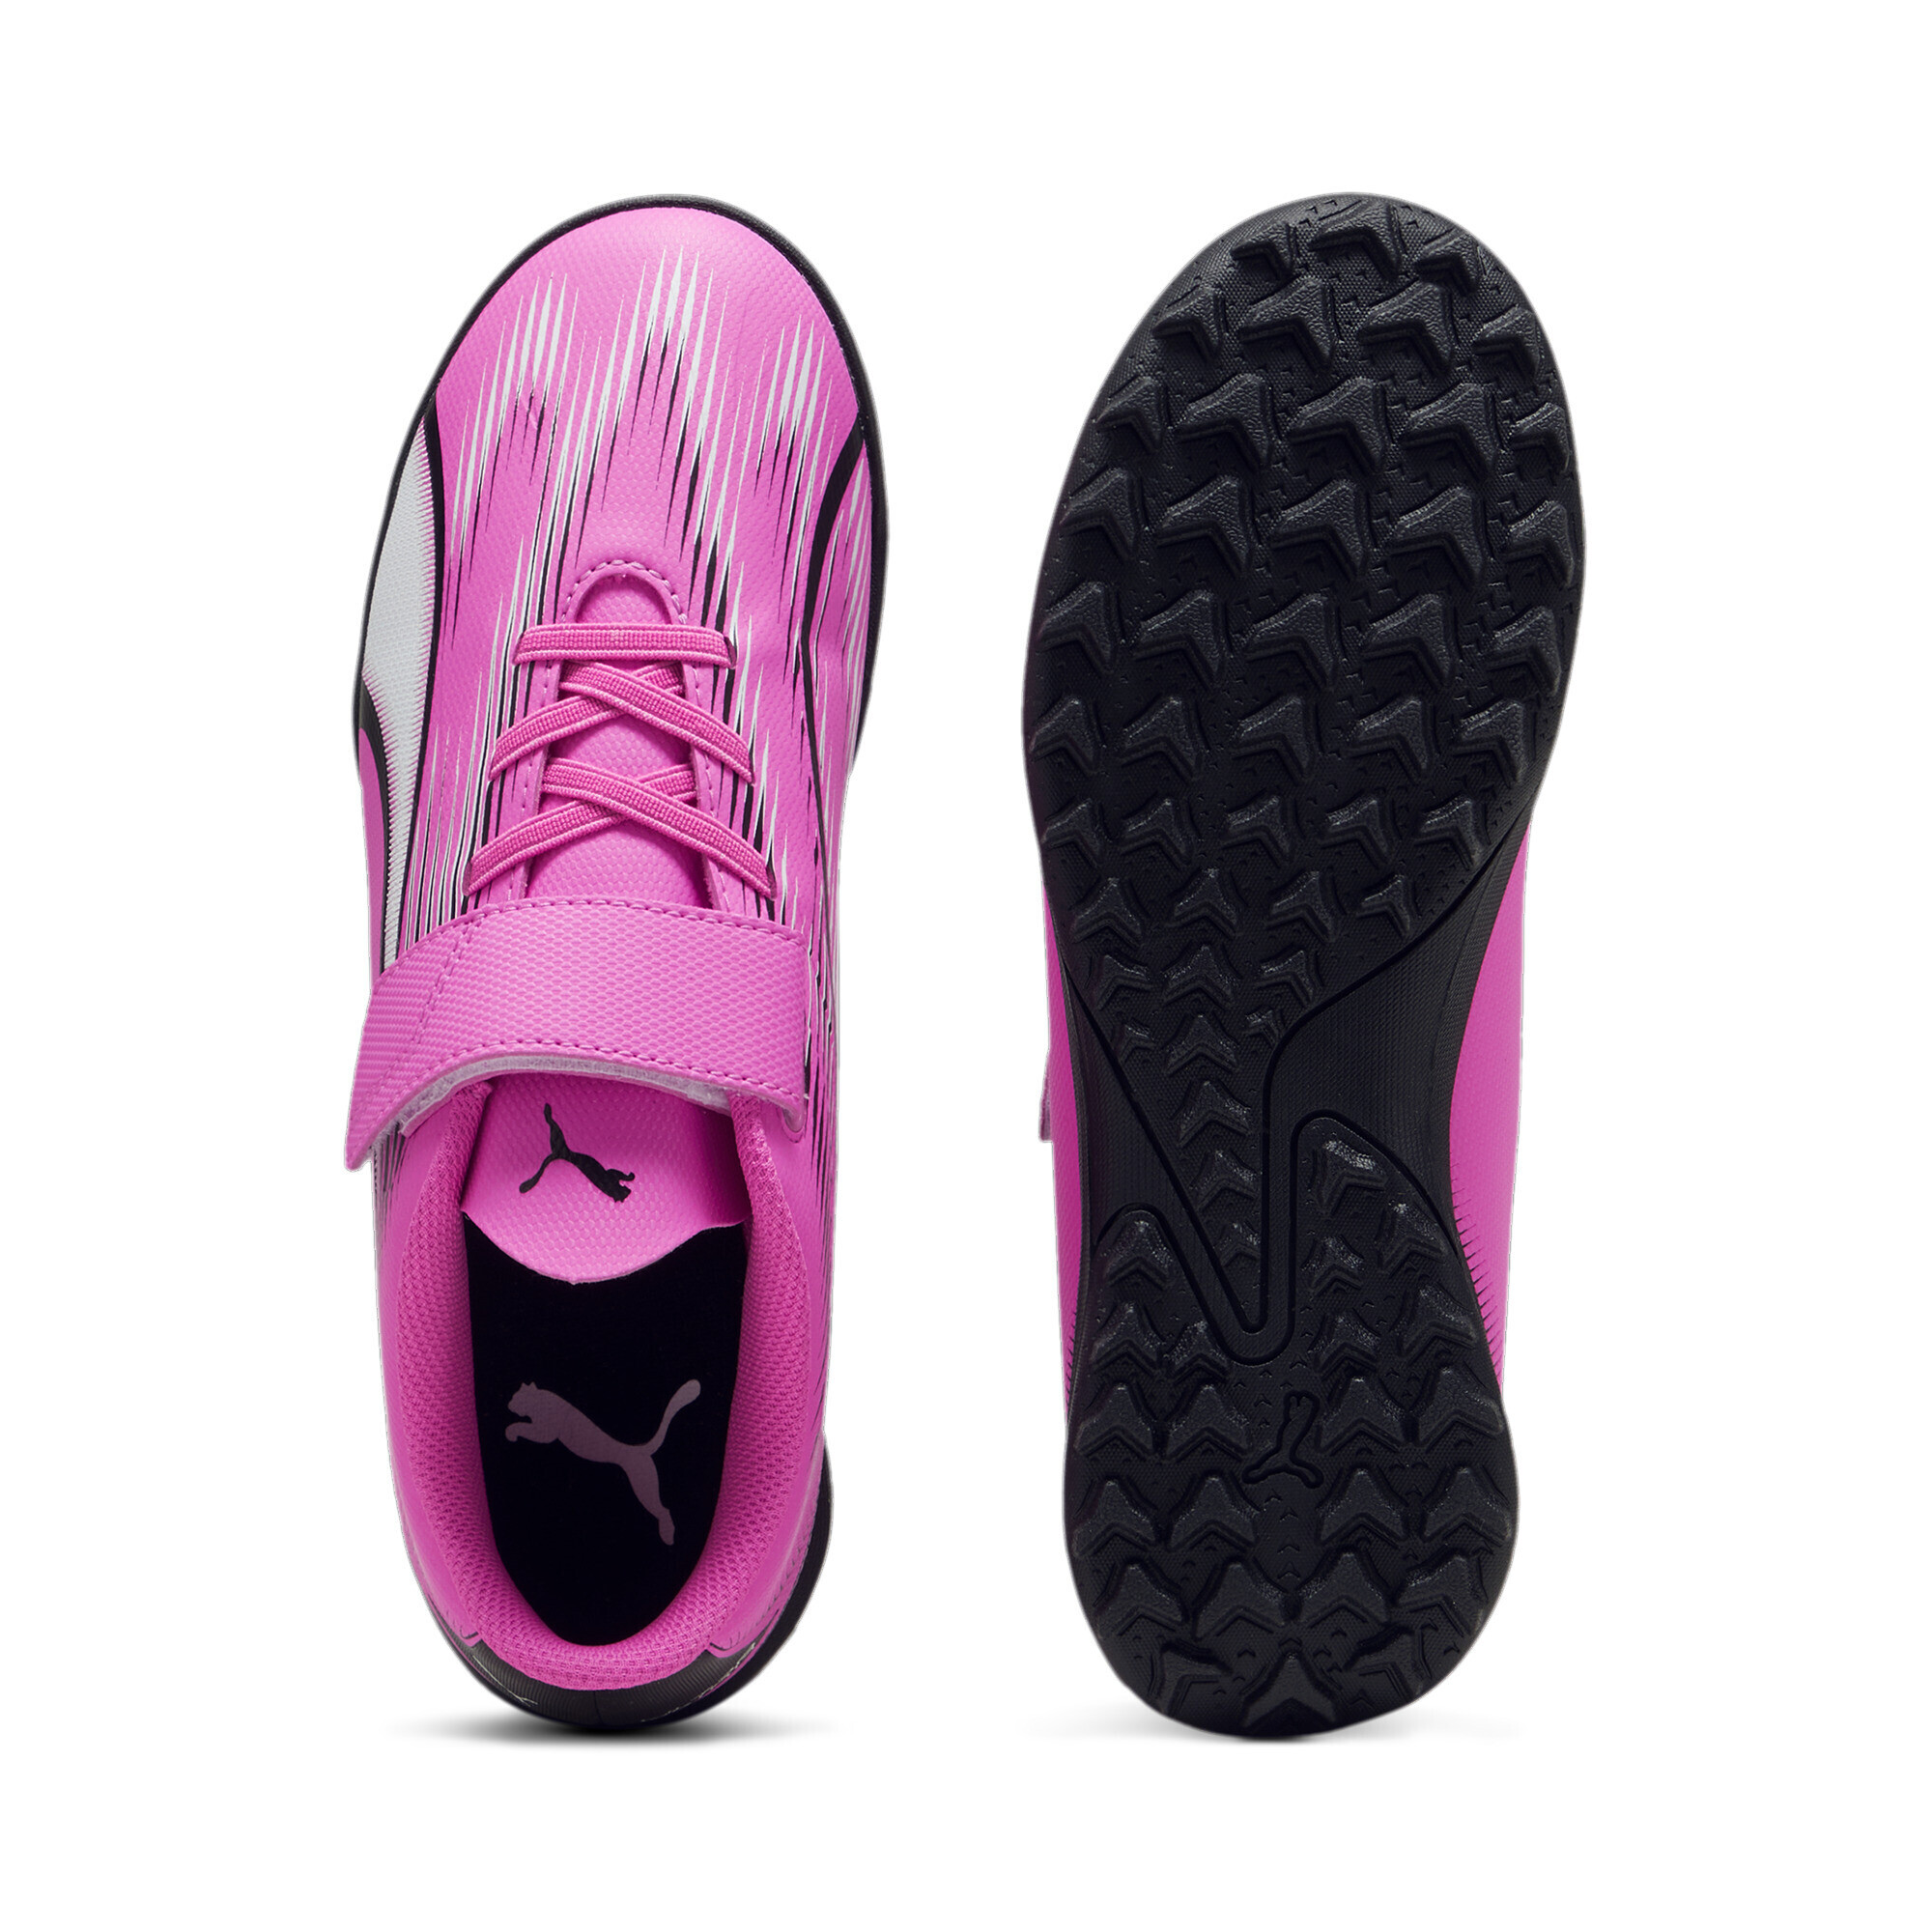 PUMA ULTRA PLAY TT Youth Football Boots In Pink, Size EU 35